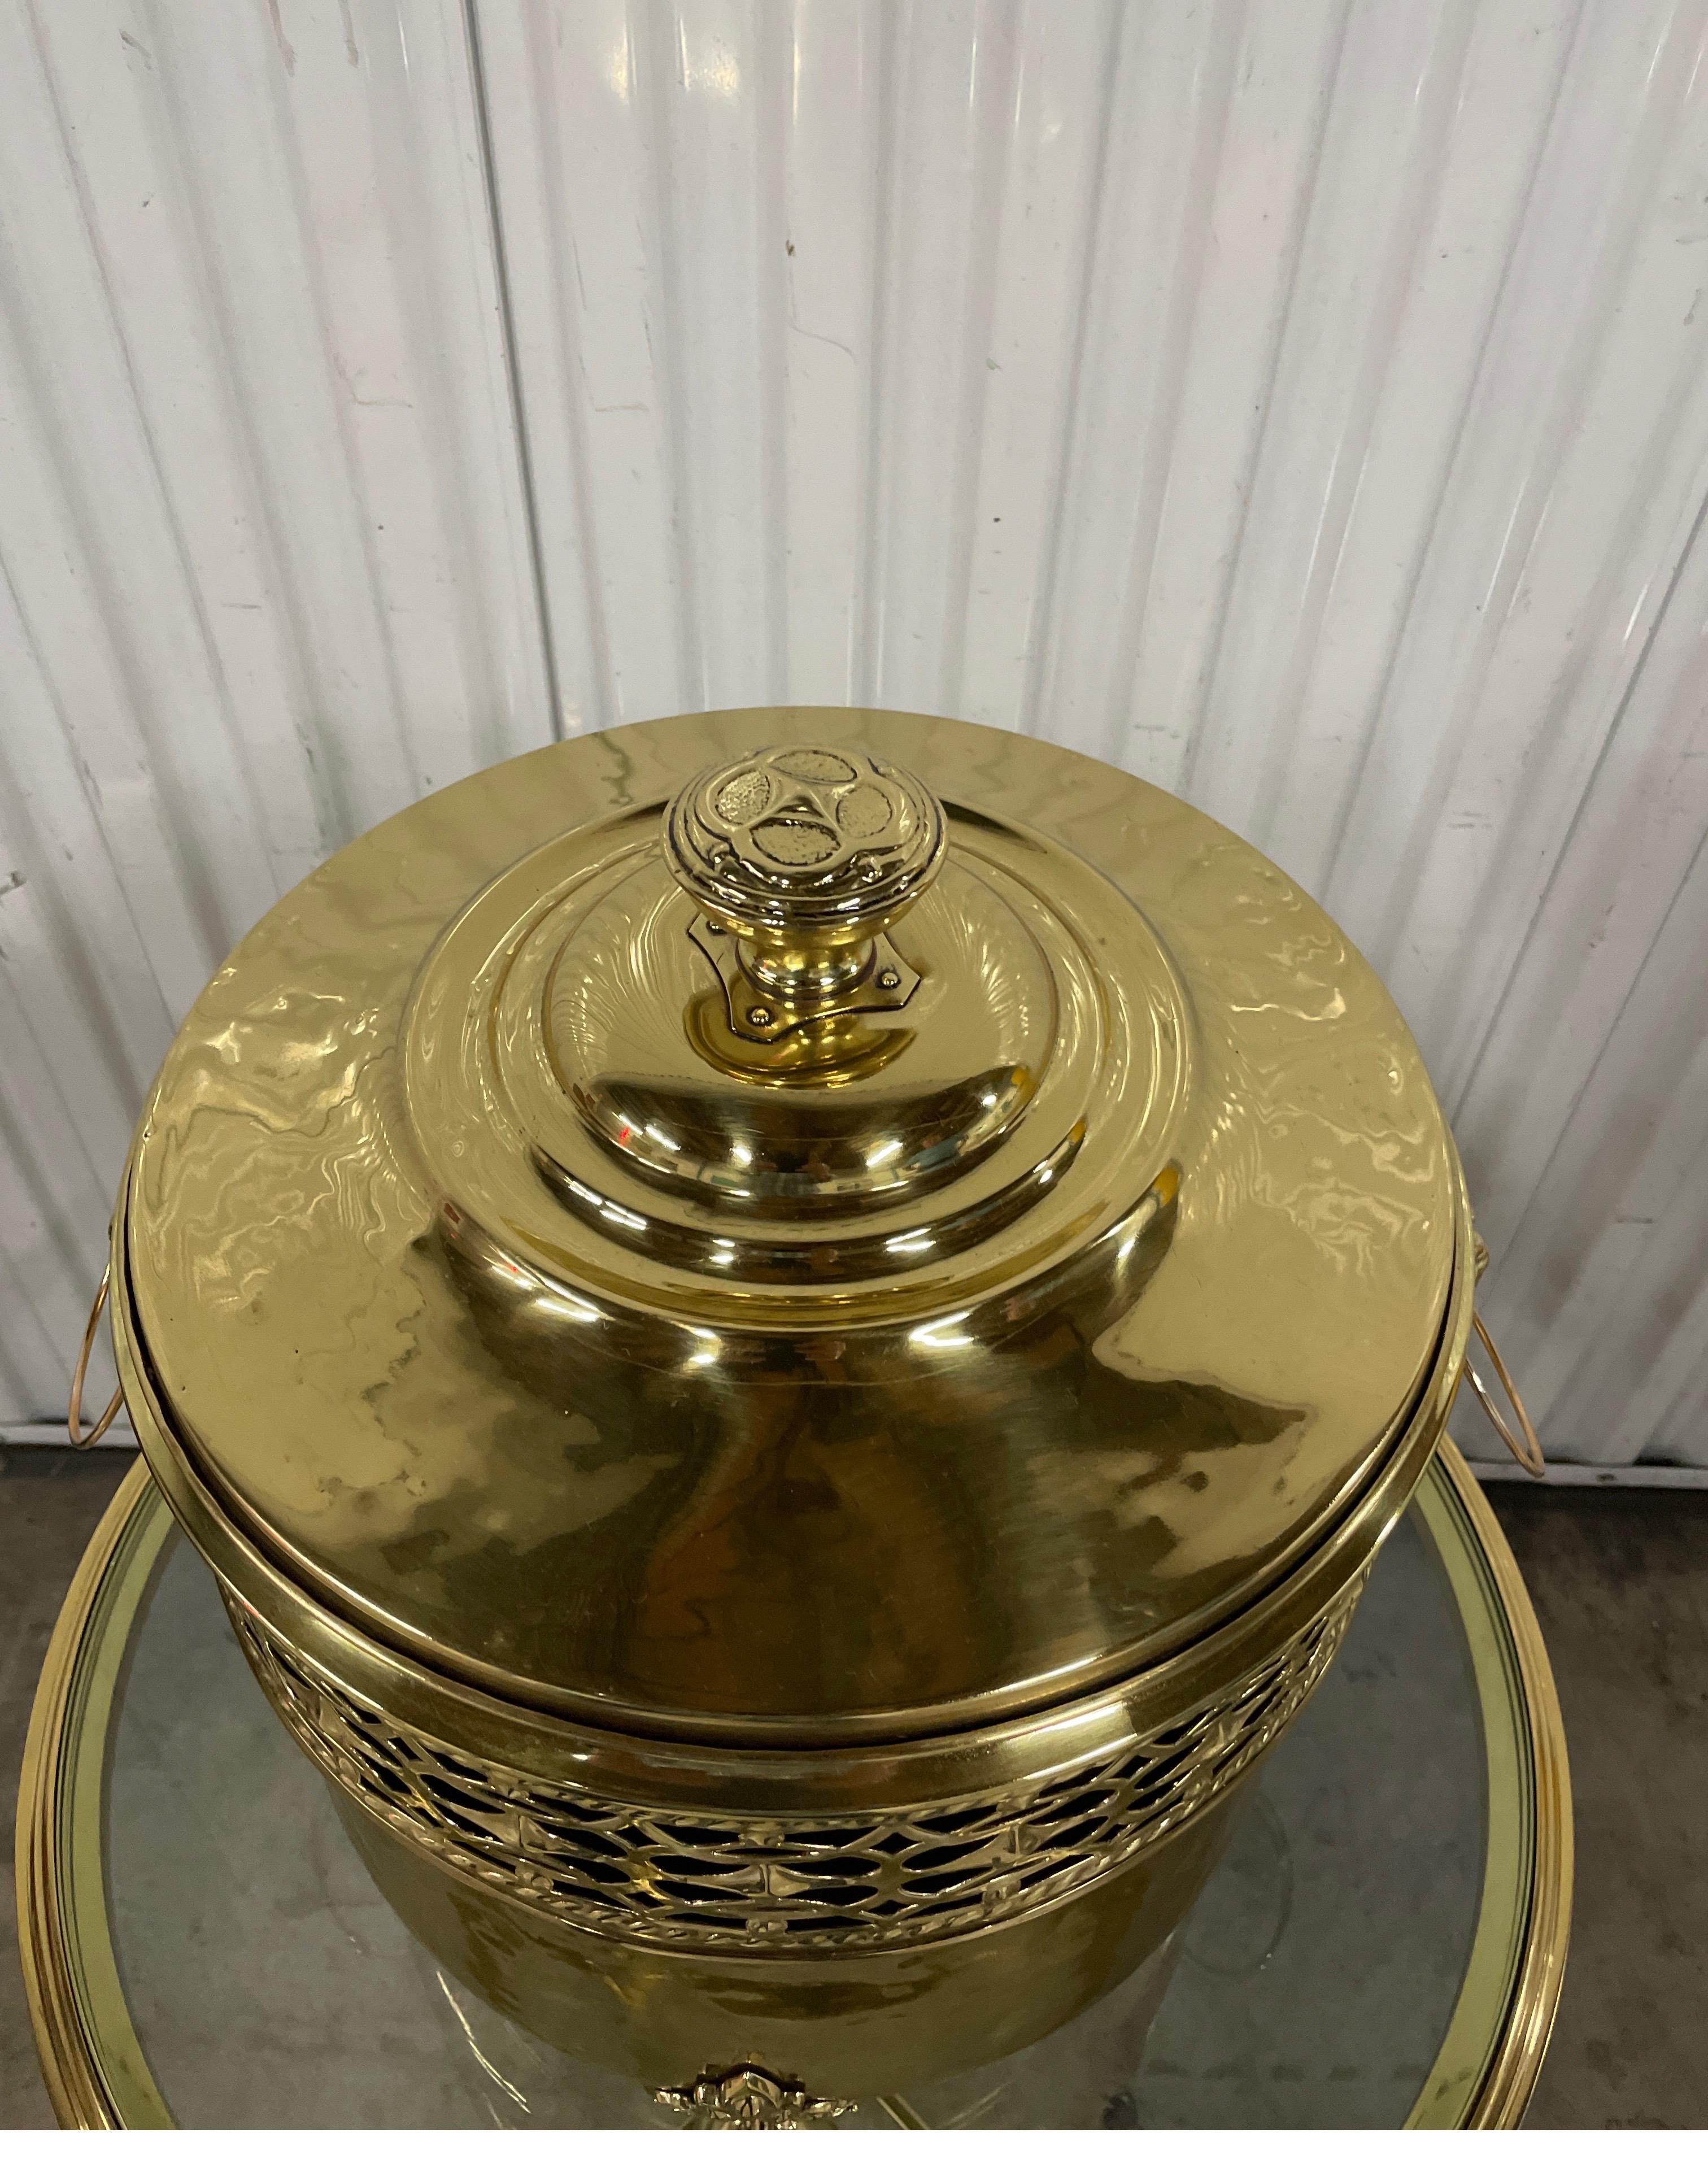 Vintage footed brass container with Lion's head details and covered top.
Pierced detailing completely around circumference. Wonderful detail throughout.